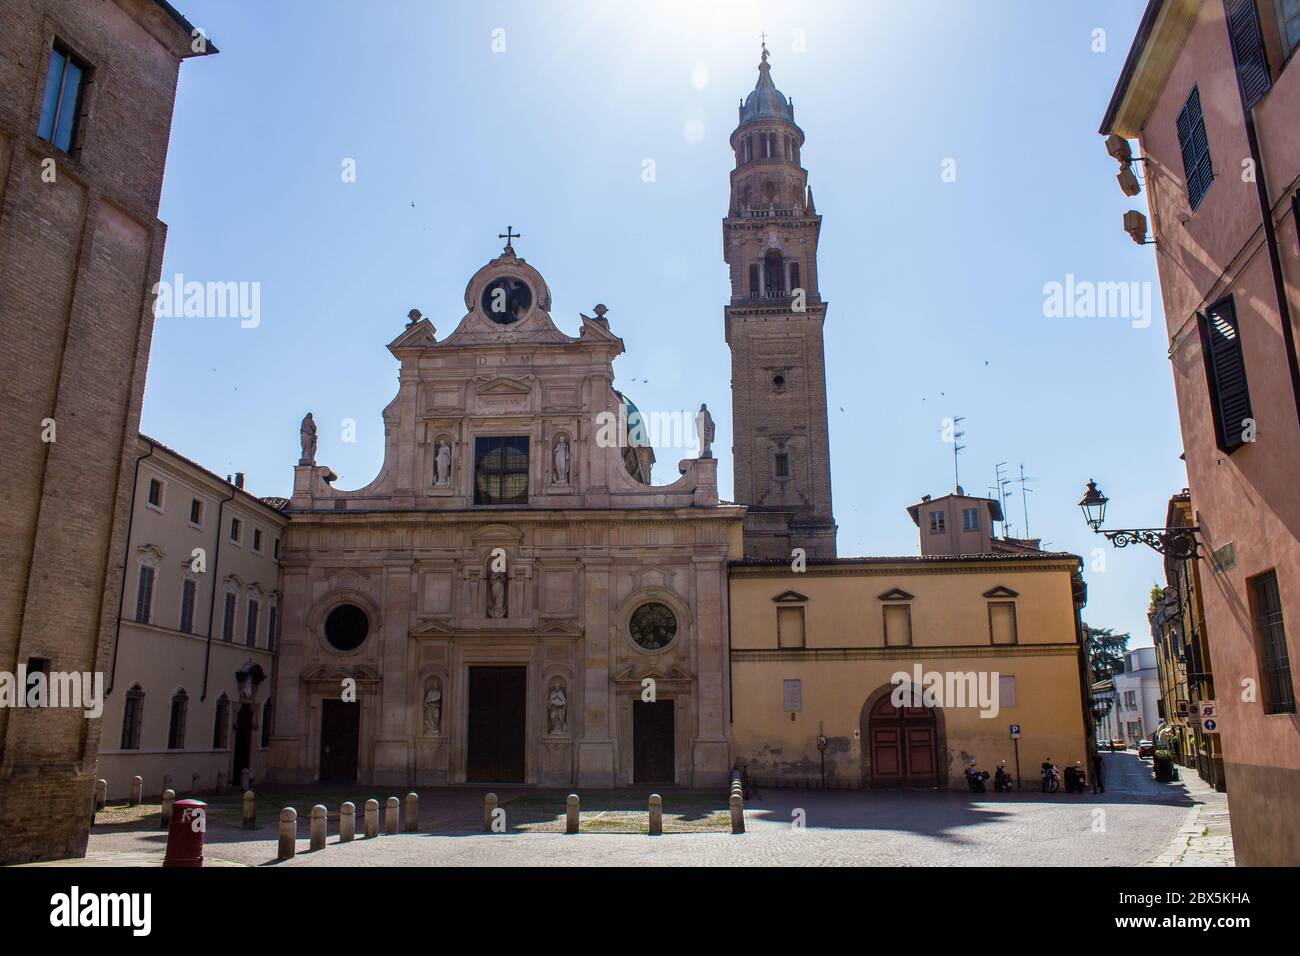 Parma, Italy - July 8, 2017: View of a San Giovanni Evangelista Church in the Old Town of Parma on a Sunny Day Stock Photo